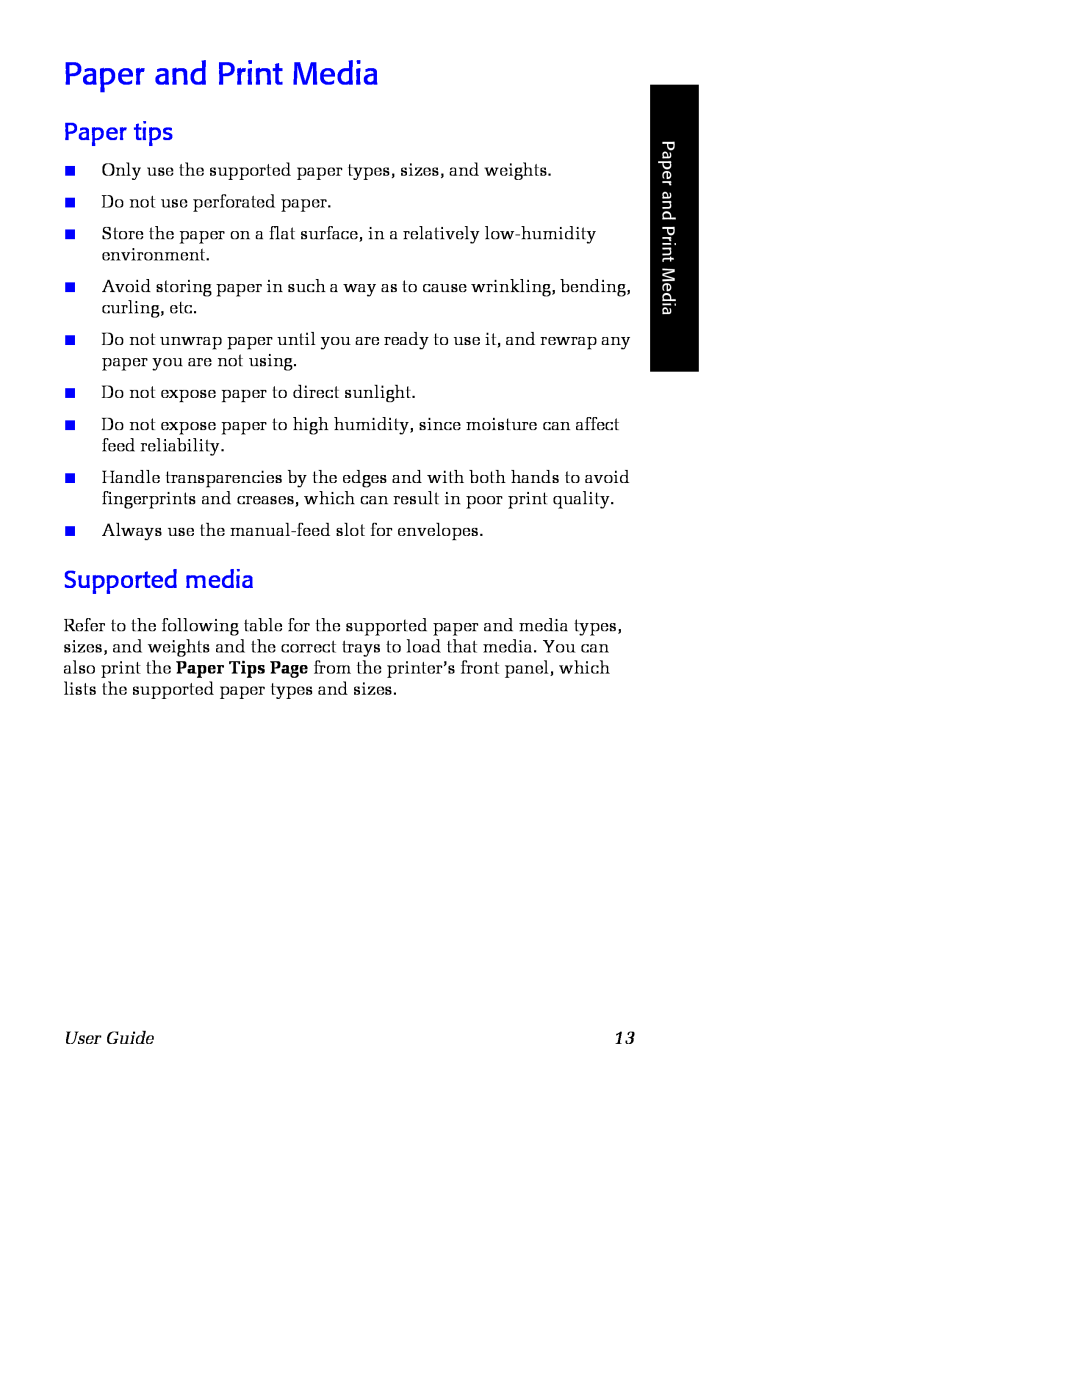 Xerox Phaser 860 manual Paper and Print Media, Paper tips, Supported media, User Guide 